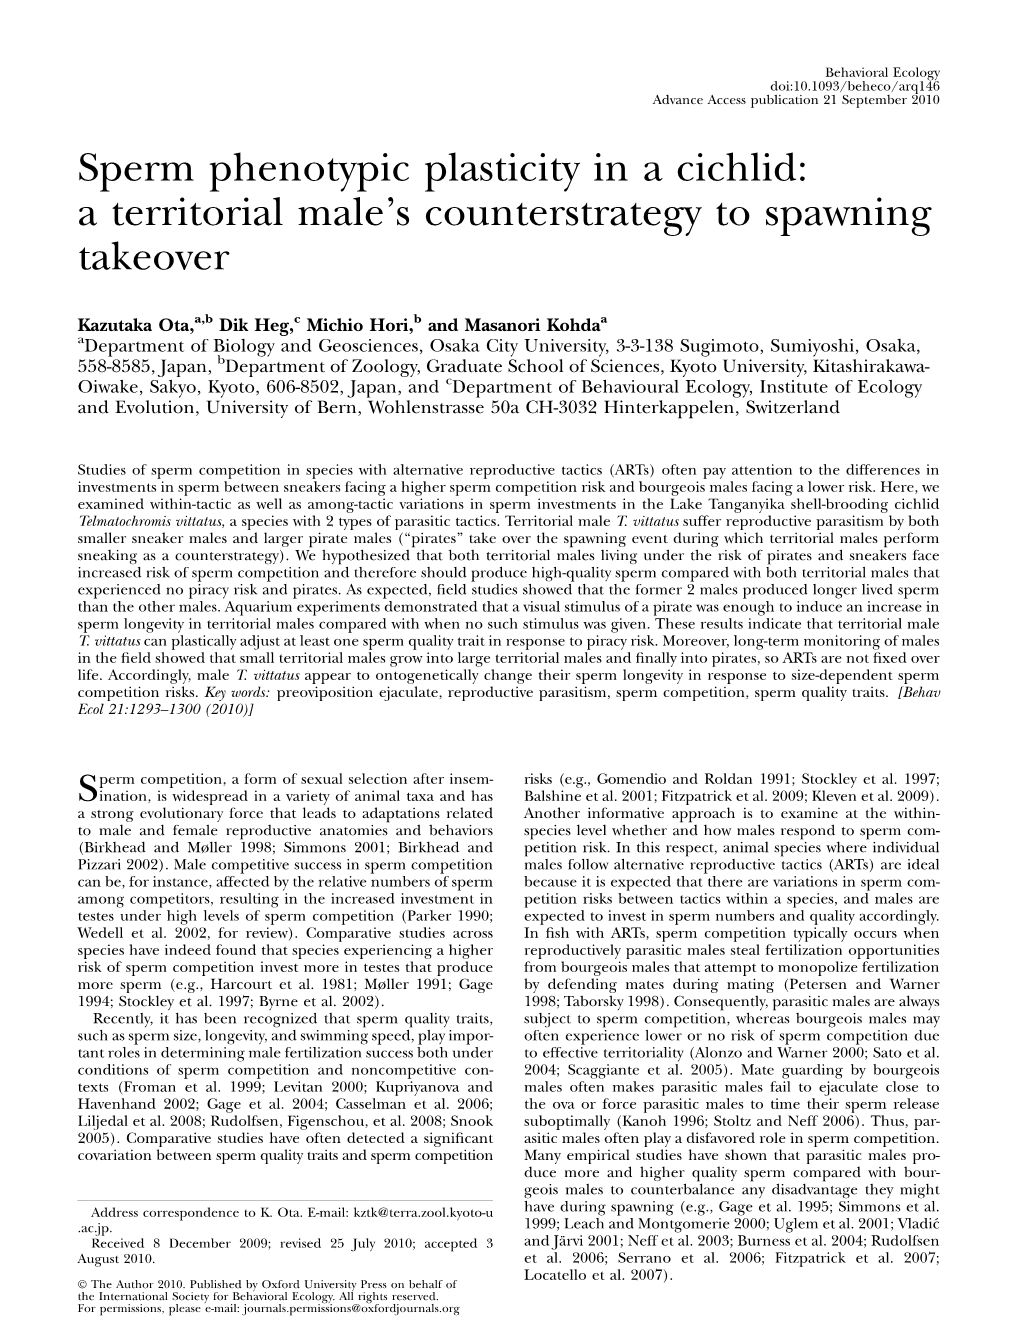 Sperm Phenotypic Plasticity in a Cichlid: a Territorial Male’S Counterstrategy to Spawning Takeover